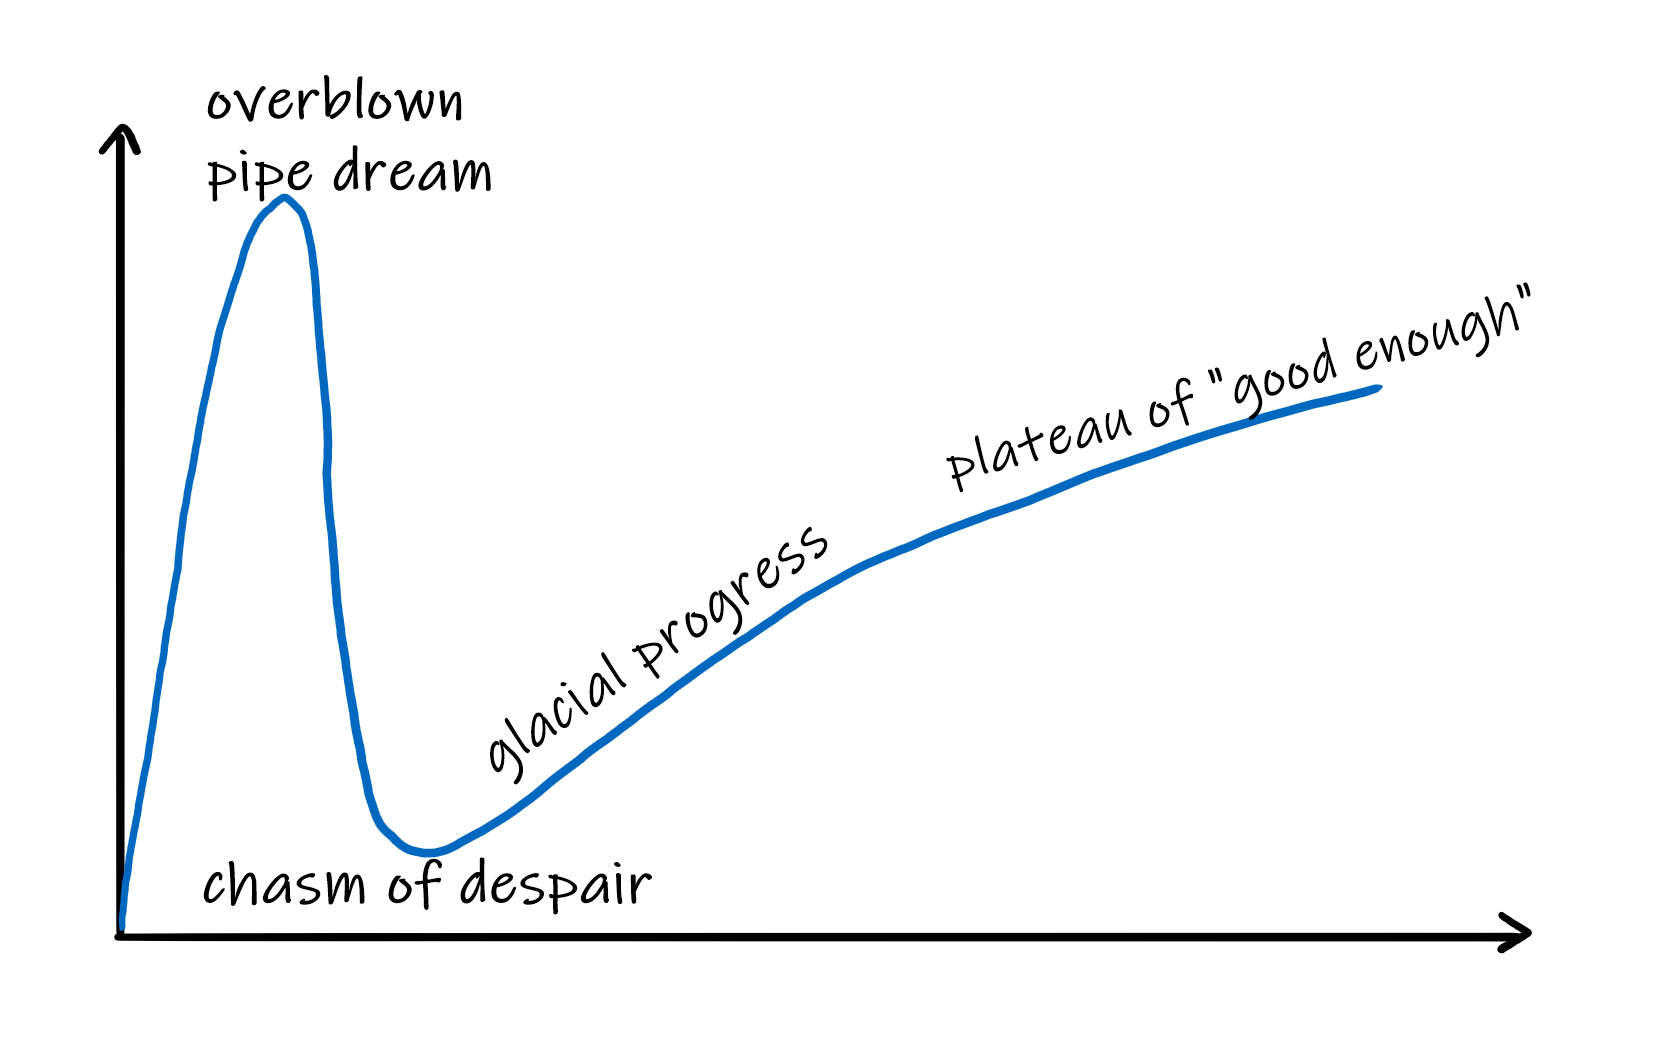 Hype cycle for side projects